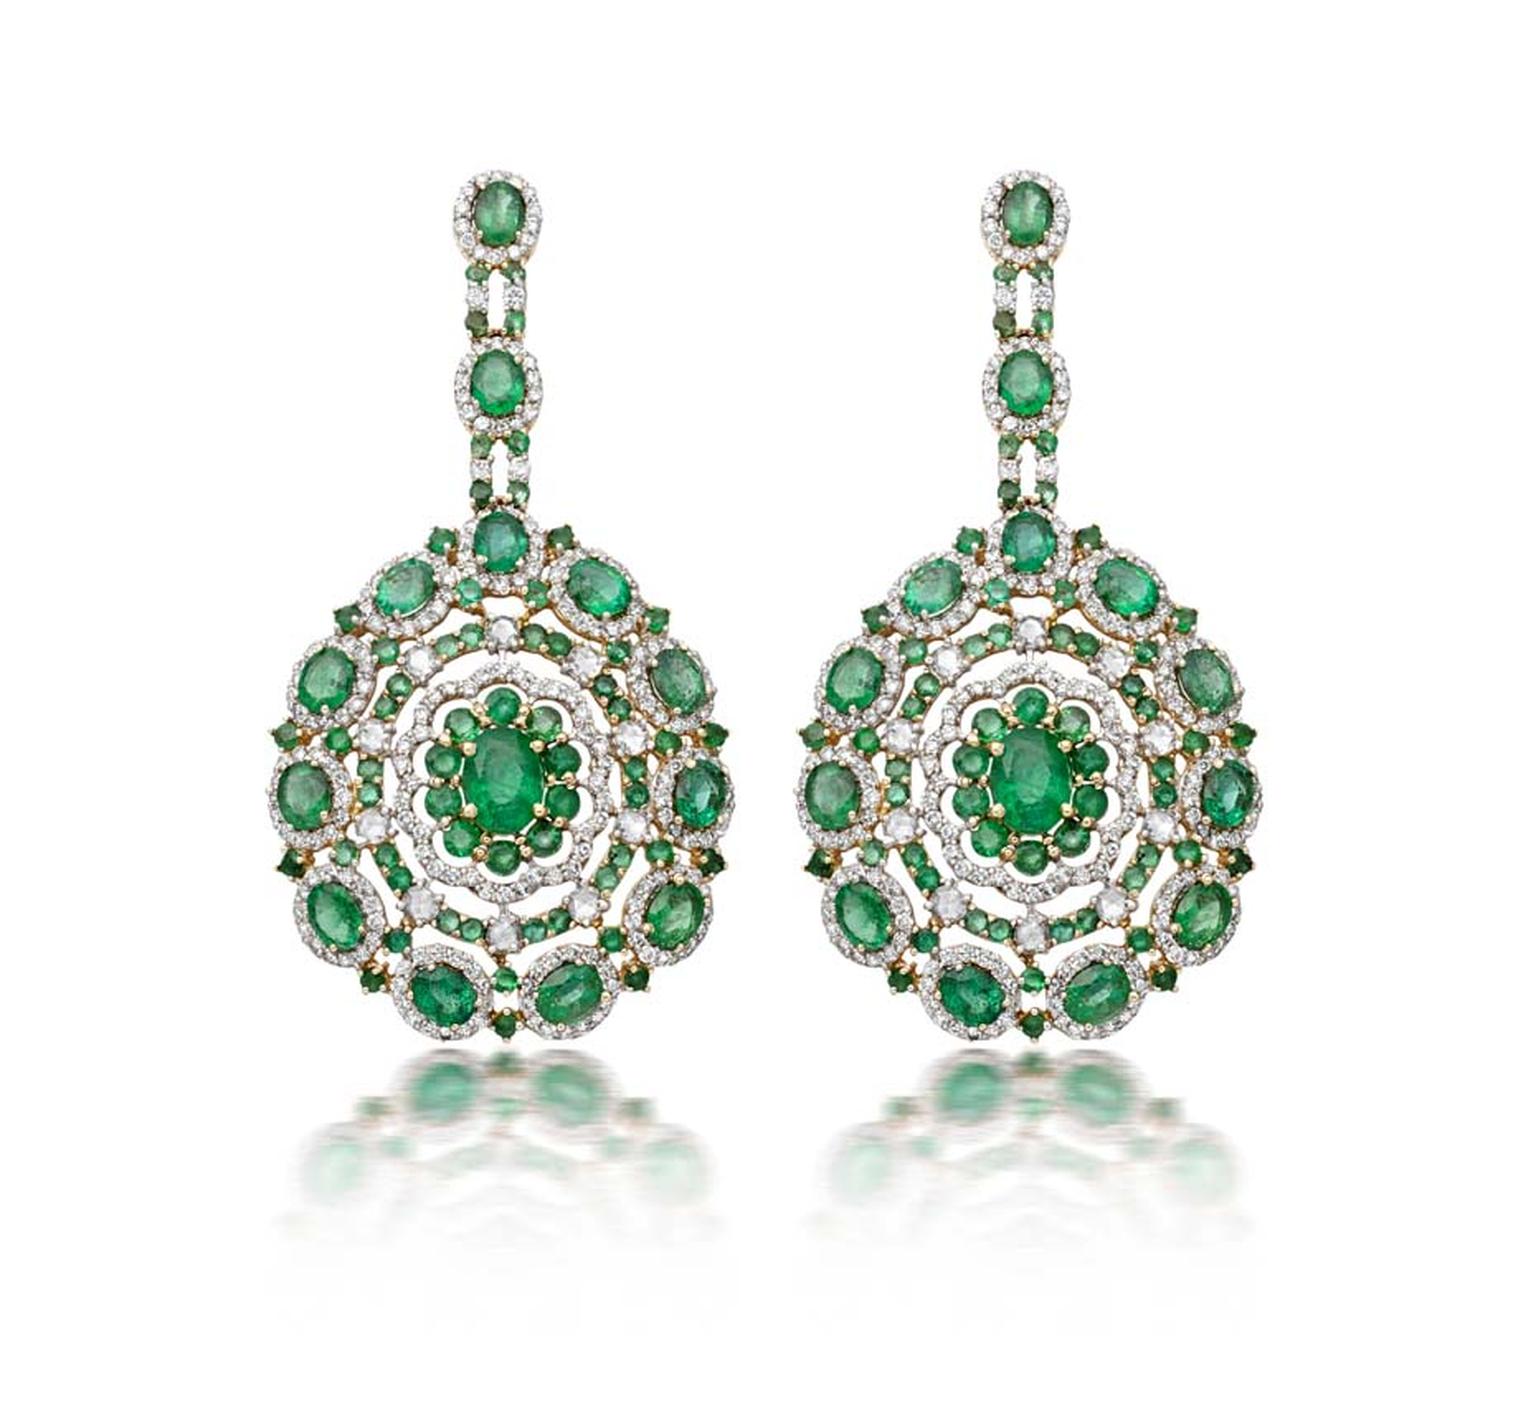 Amrapali gold Floral earrings featuring Zambian emeralds and diamonds